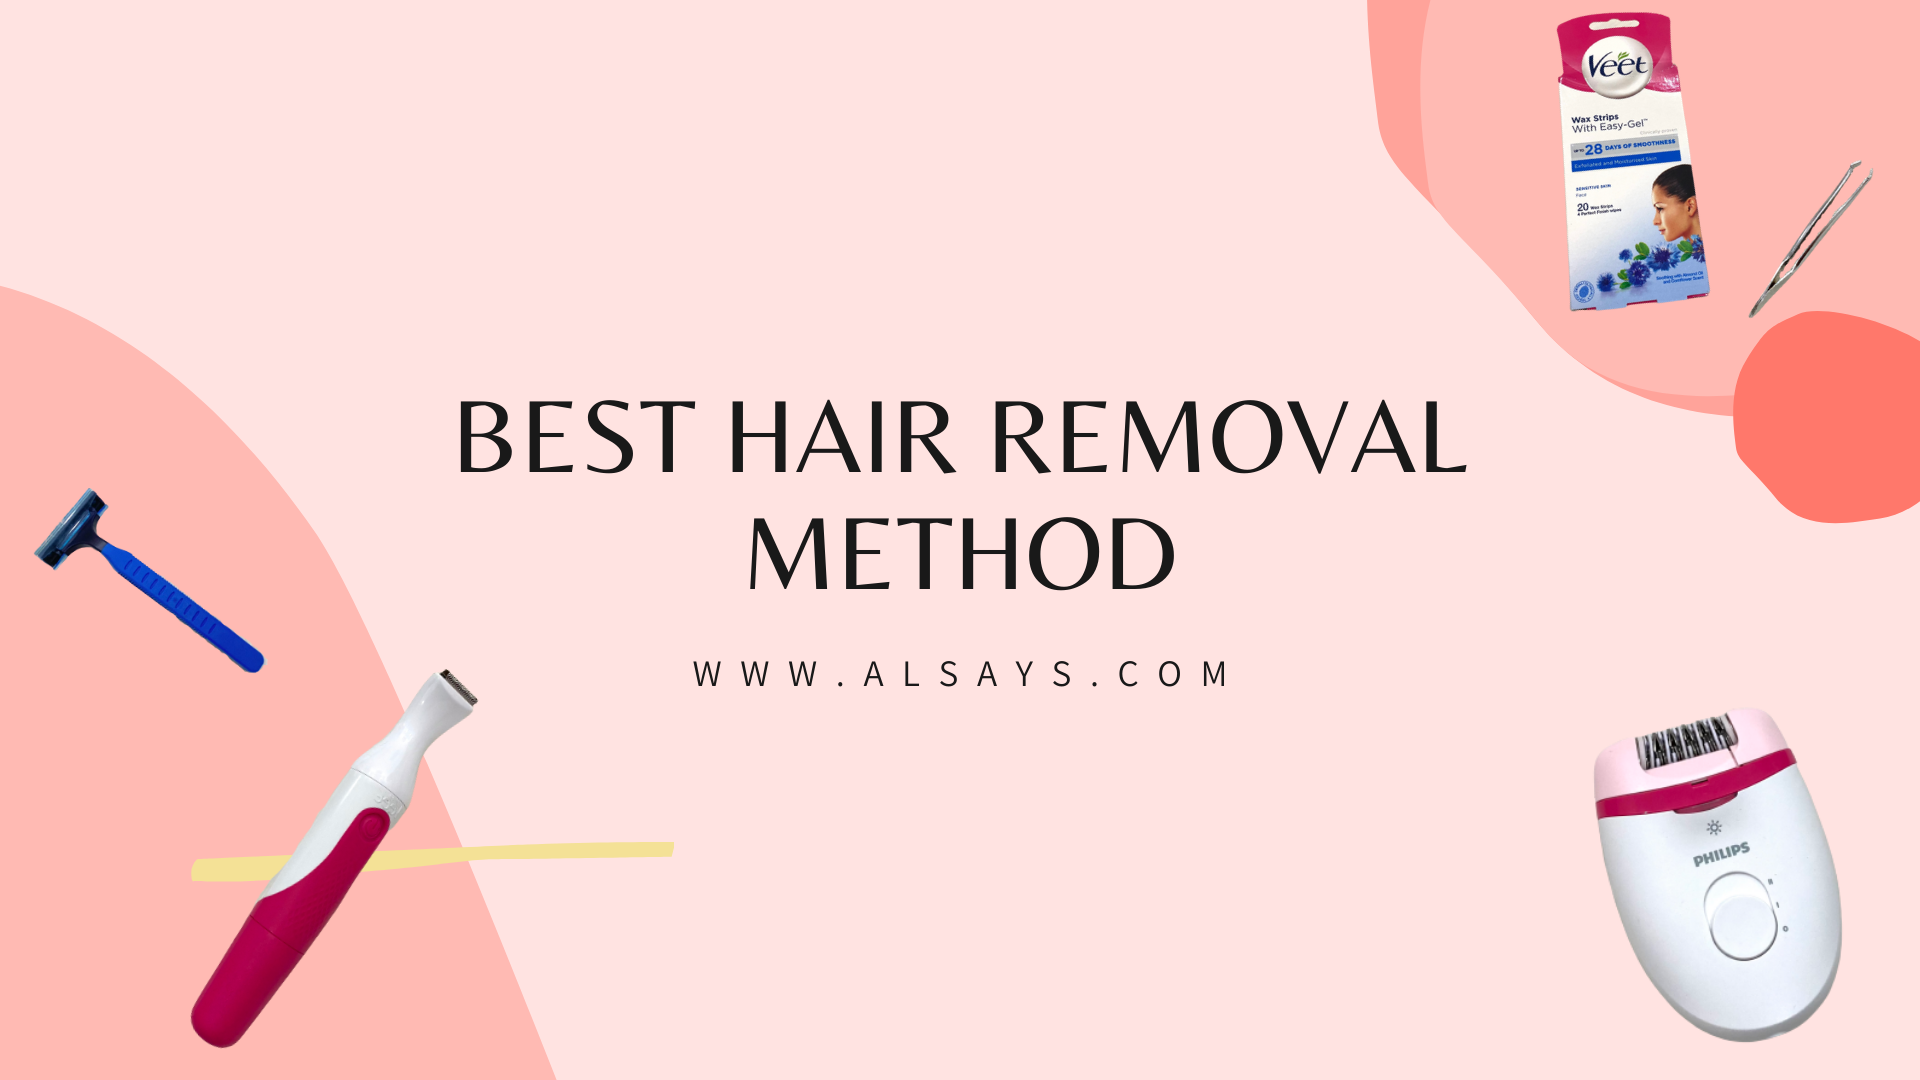 71 Hair Removal ideas  hair removal beauty hacks skin care